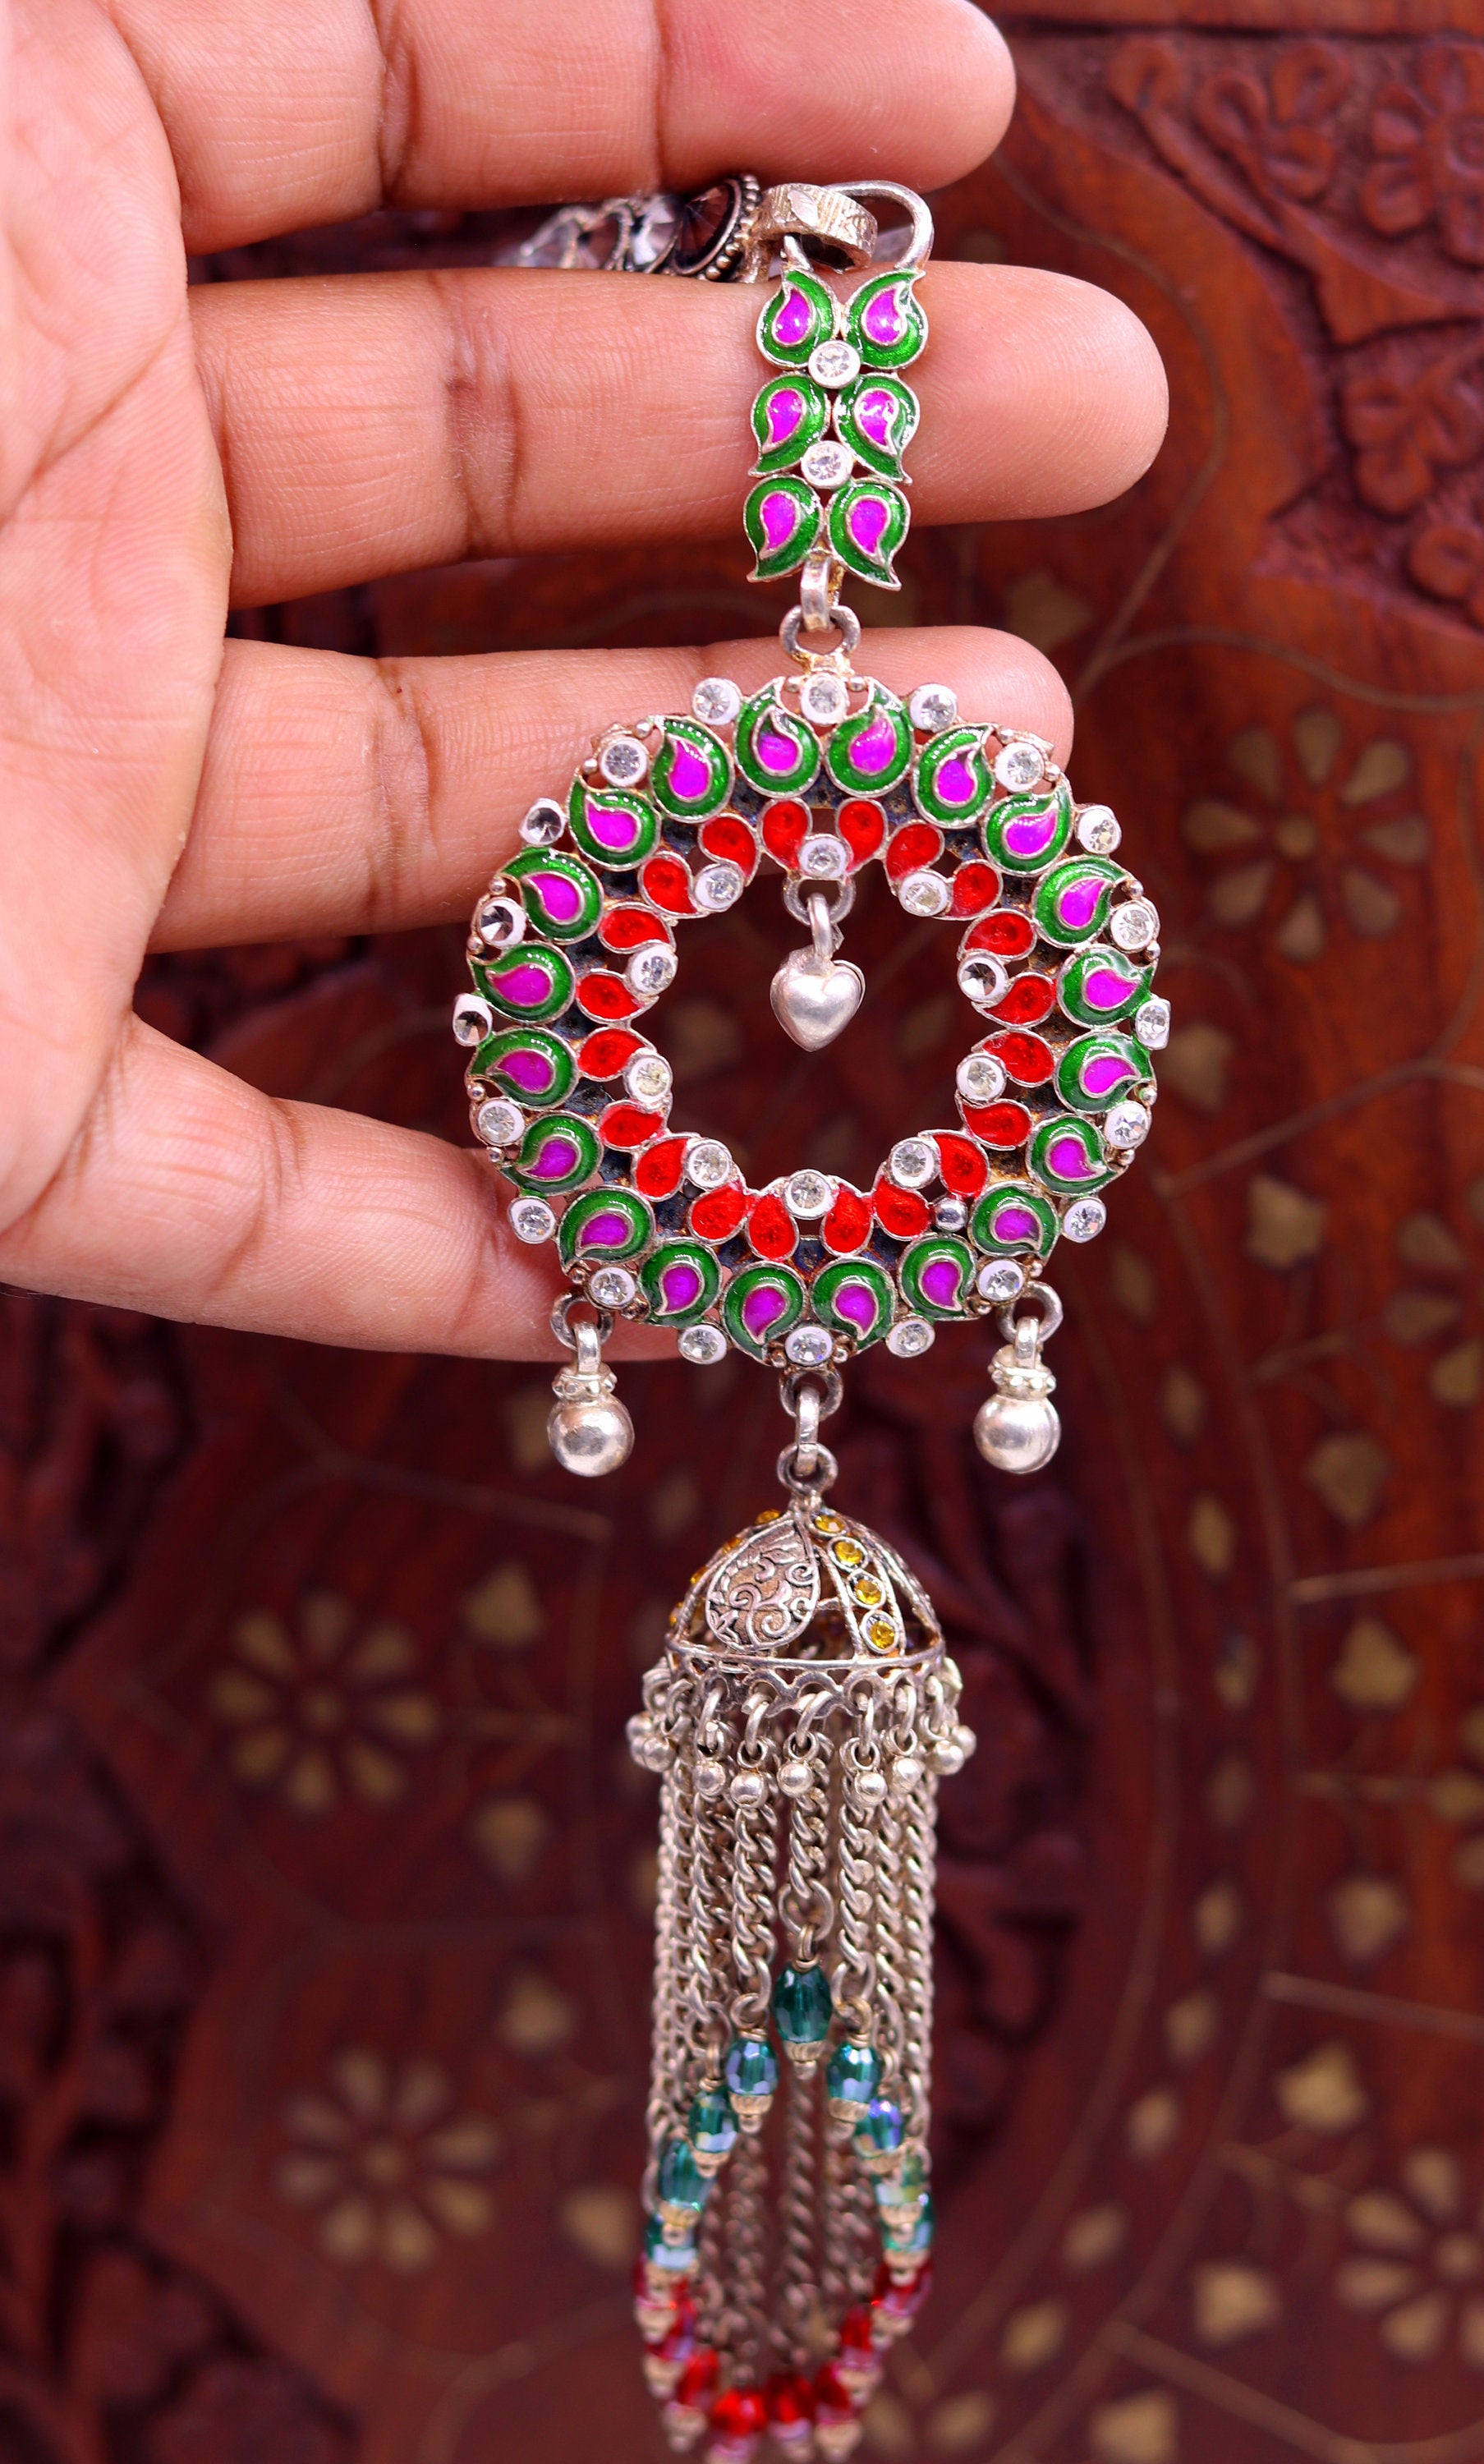 Sterling silver handmade old used enamel key chain sari pin excellent waist chain chhalla, kandora, satka tribal belly dance jewelry chh07 - TRIBAL ORNAMENTS